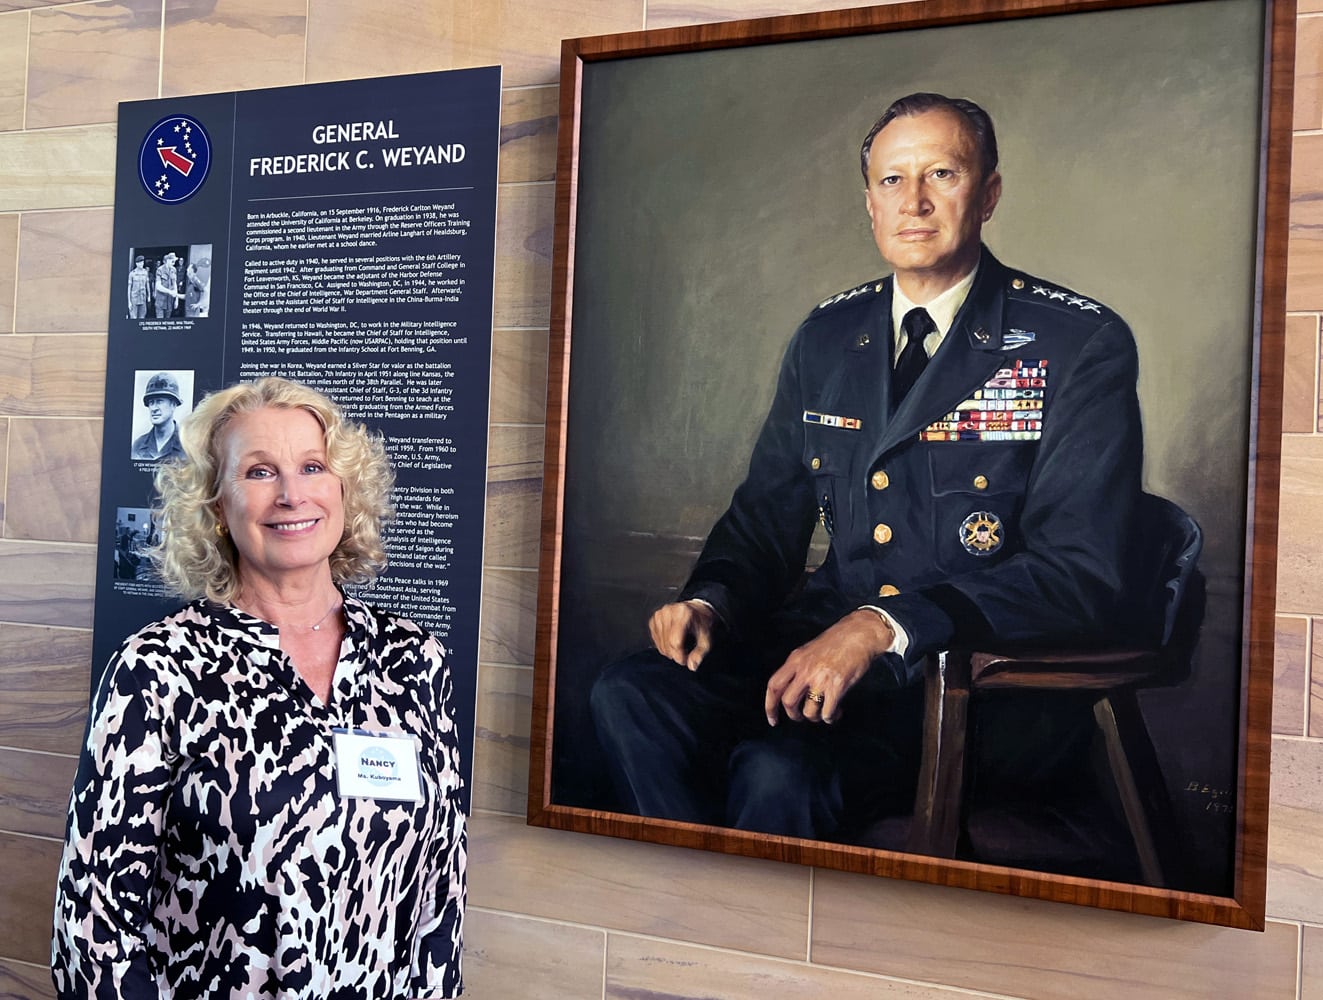 Nancy Hart Kuboyama, General Weyand’s daughter with portrait of her dad in the building that now bears his name at Ft. Shafter, Hawaii